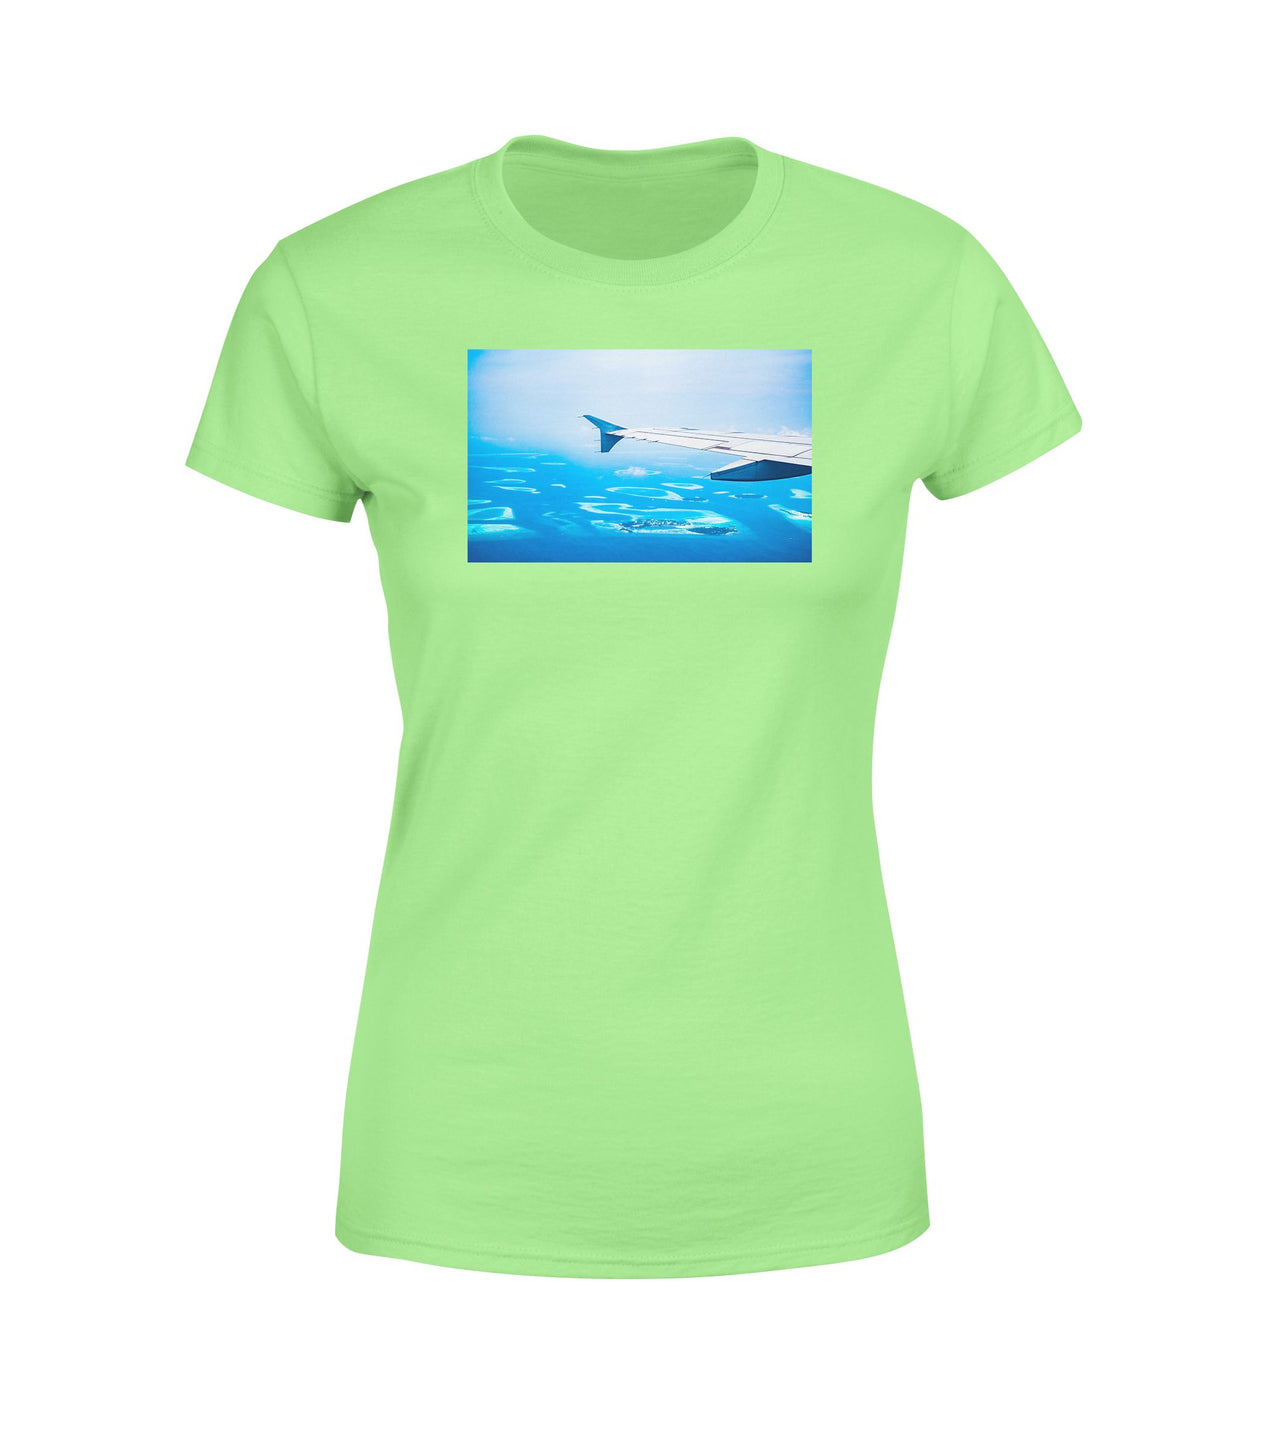 Outstanding View Through Airplane Wing Designed Women T-Shirts